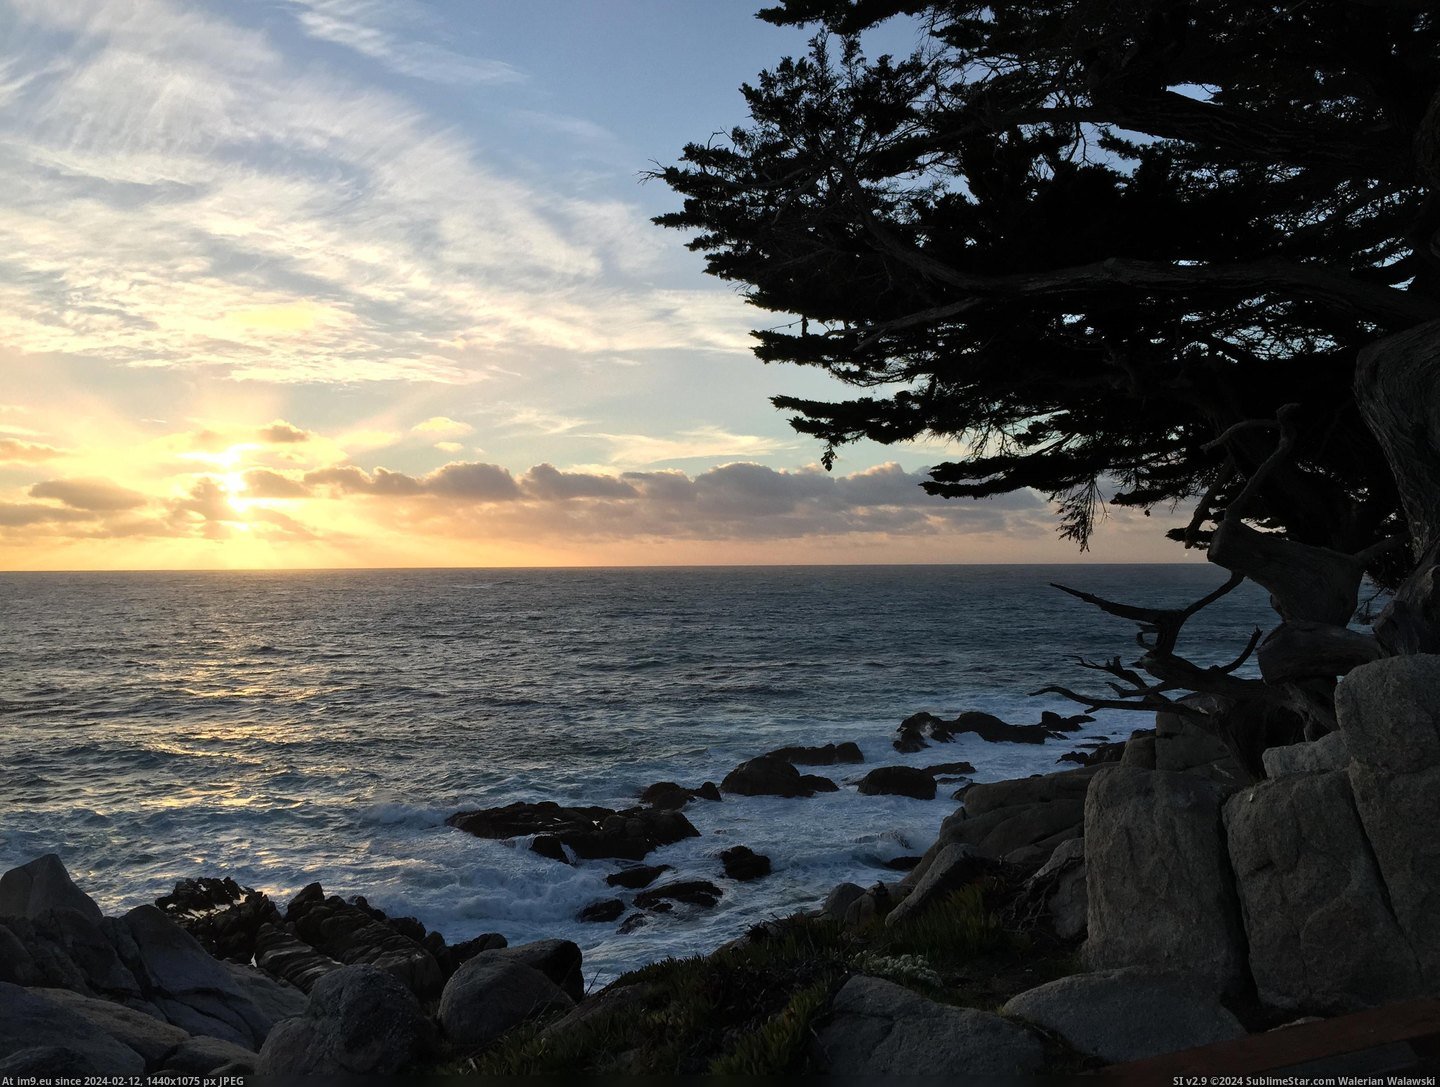 #Sunset #3264x2448 #Cypress #Drive #Mile [Earthporn] Cypress Sunset - 17 Mile Drive, CA 2015 [3264x2448] Pic. (Obraz z album My r/EARTHPORN favs))